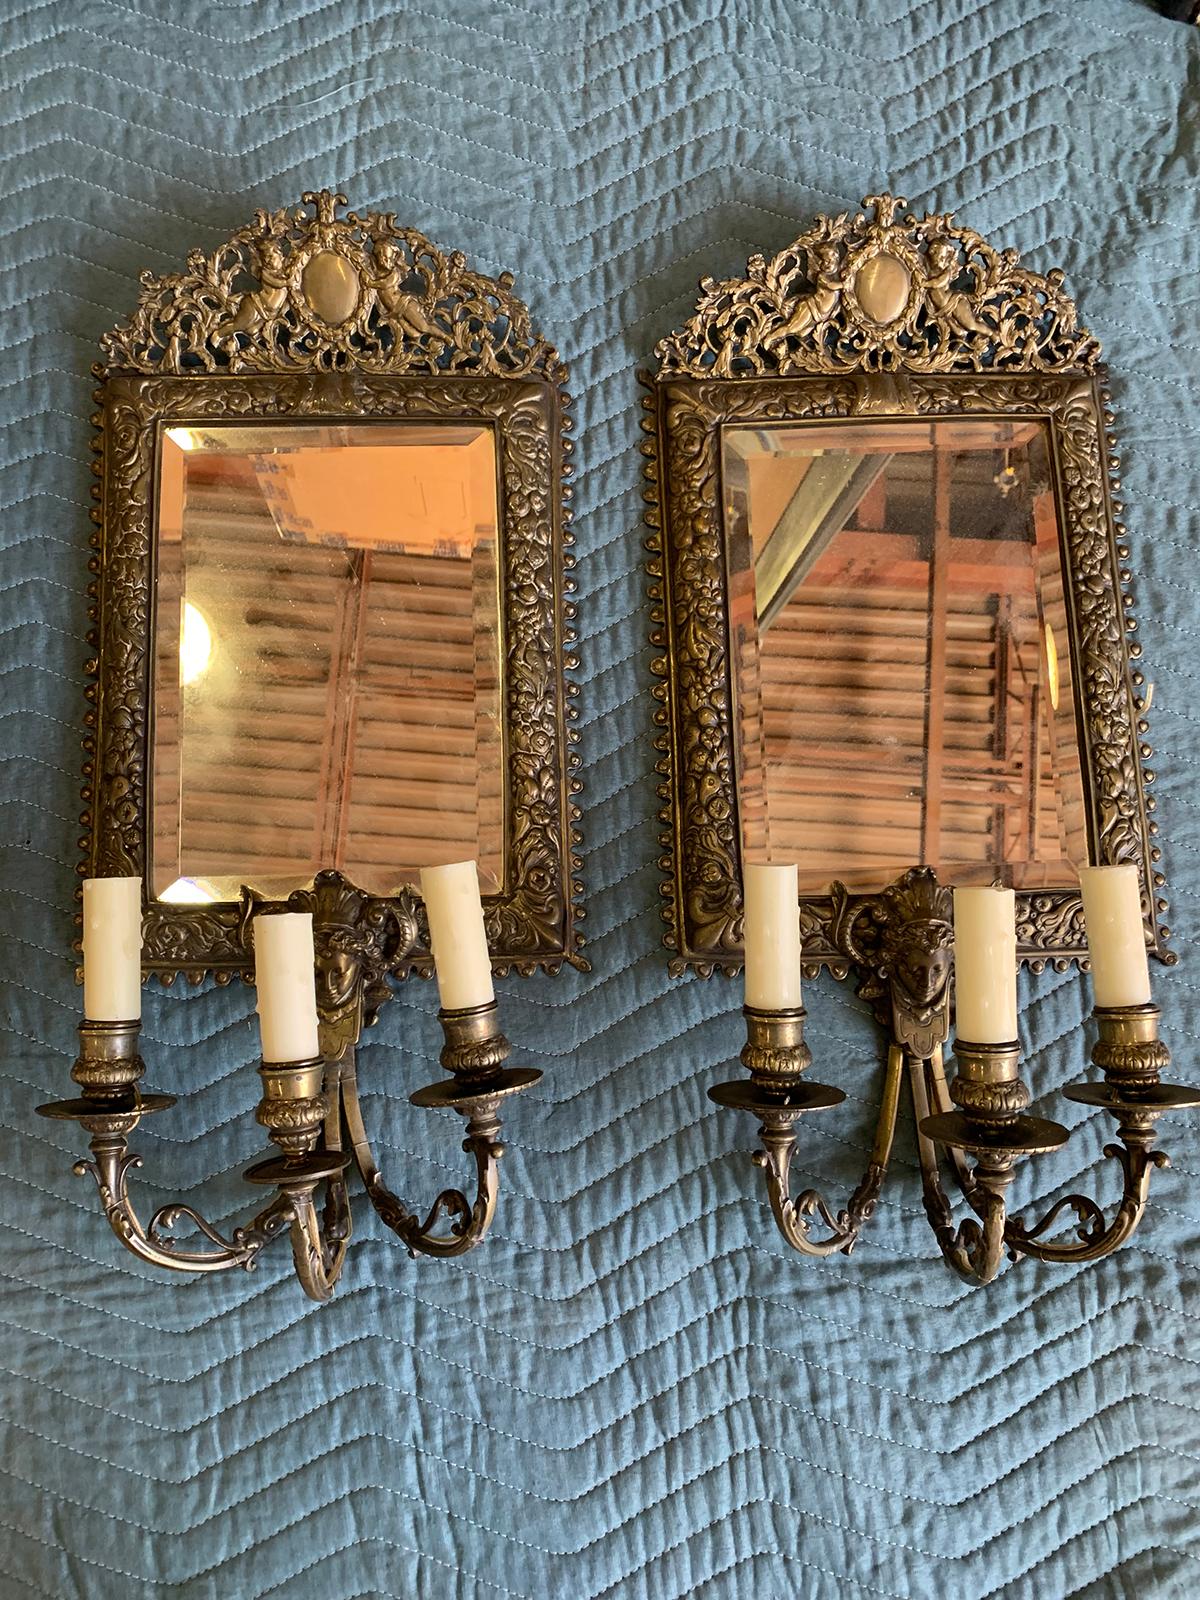 Pair of French Bronze Mirrored Three-Arm Sconces, Circa 1900
Re-wired 